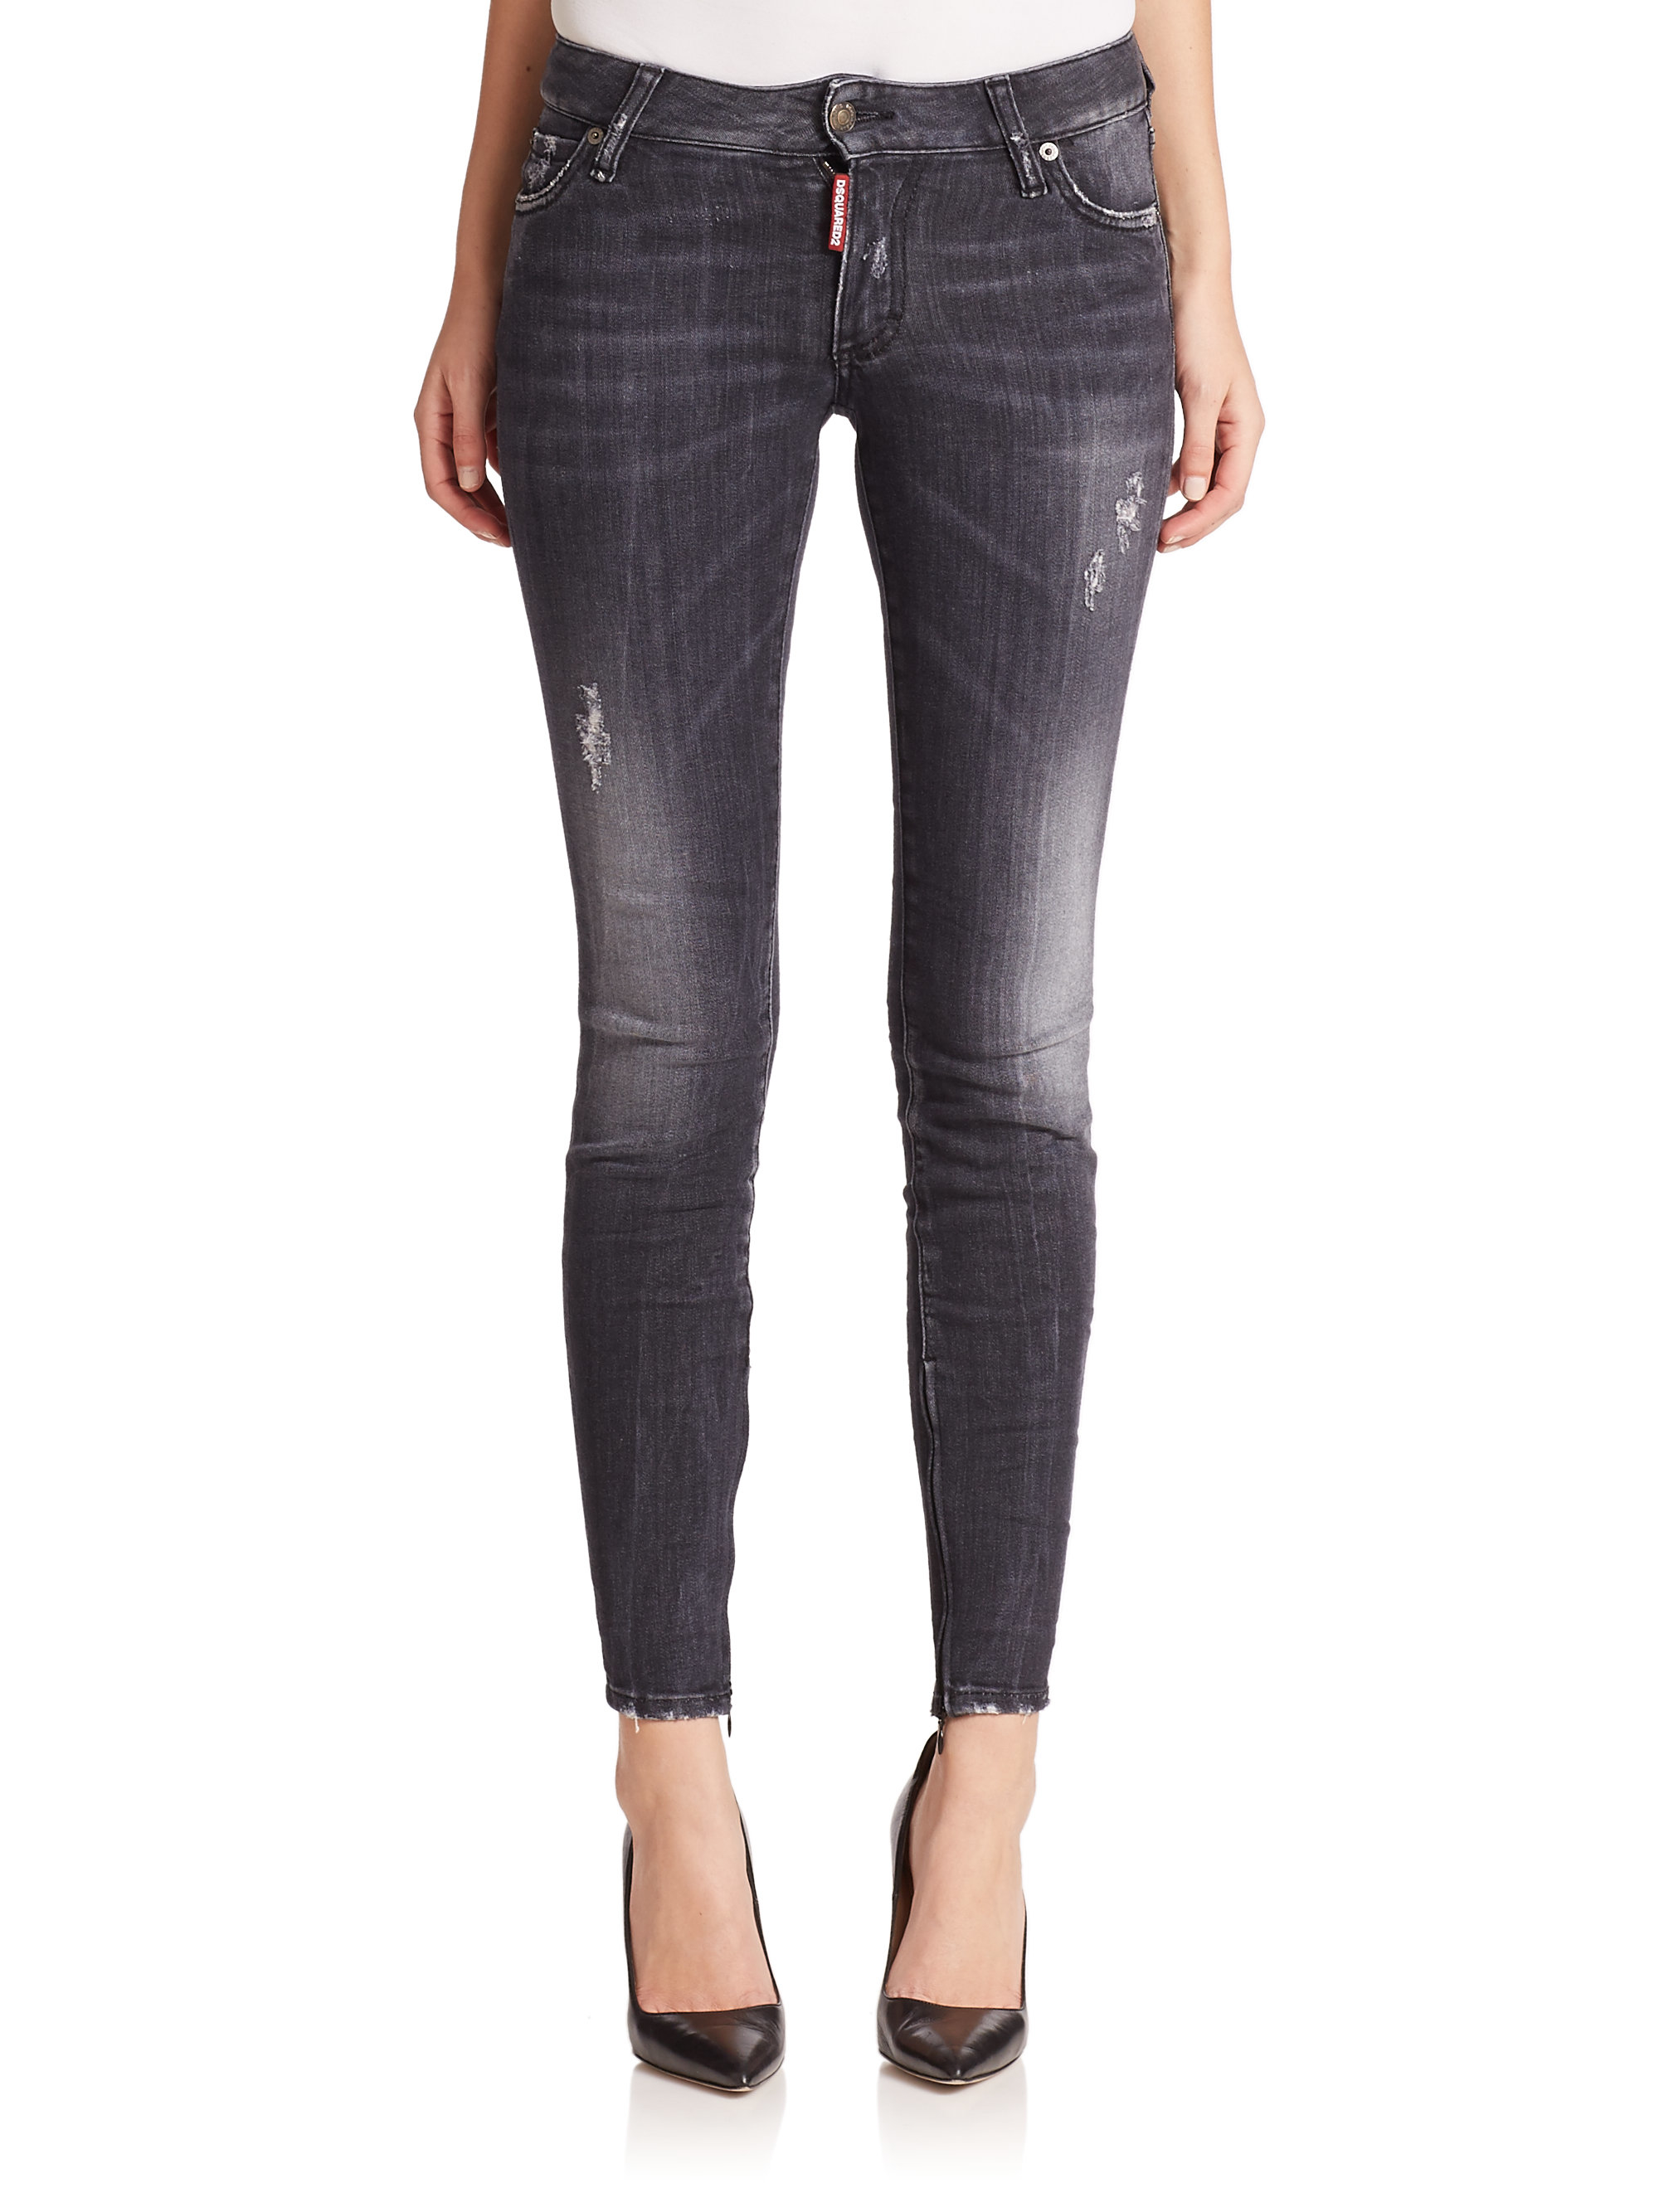 Lyst - Dsquared² Twiggy Distressed Skinny Jeans in Black